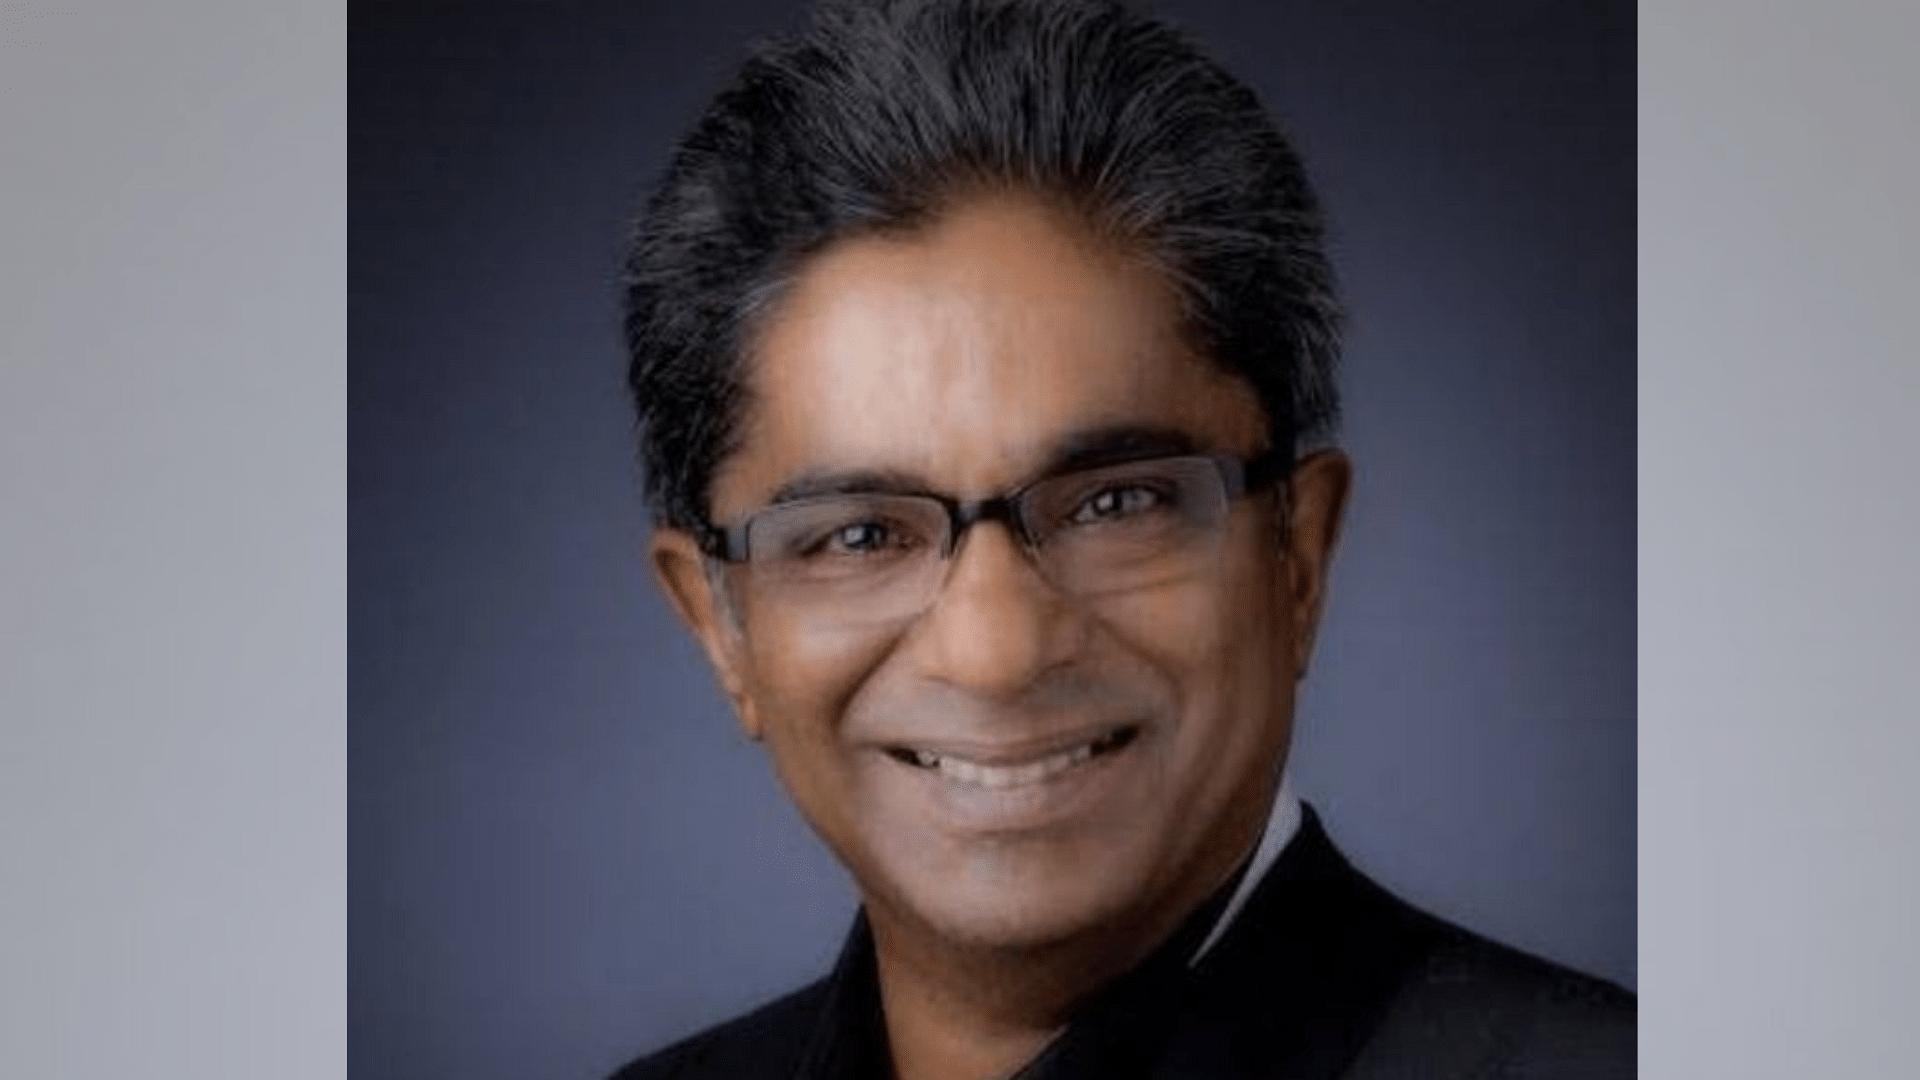 Rajiv Saxena is a co-accused in the AgustaWestland deal.